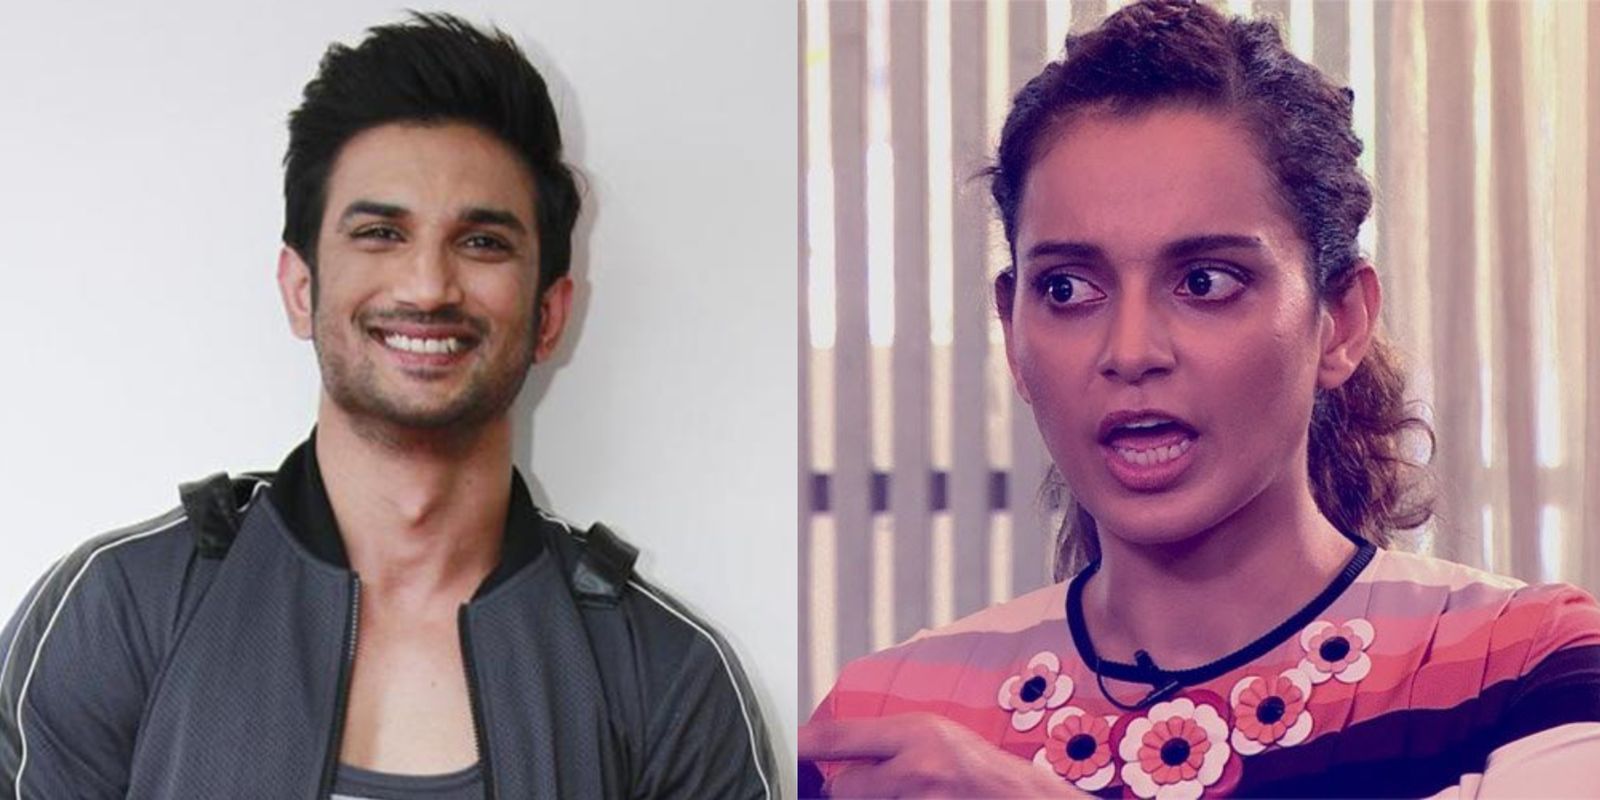 Sushant’s Family Lawyer Calls Kangana’s Statement ‘Unimportant’; Says “She's Trying To Further Her Own Agenda”